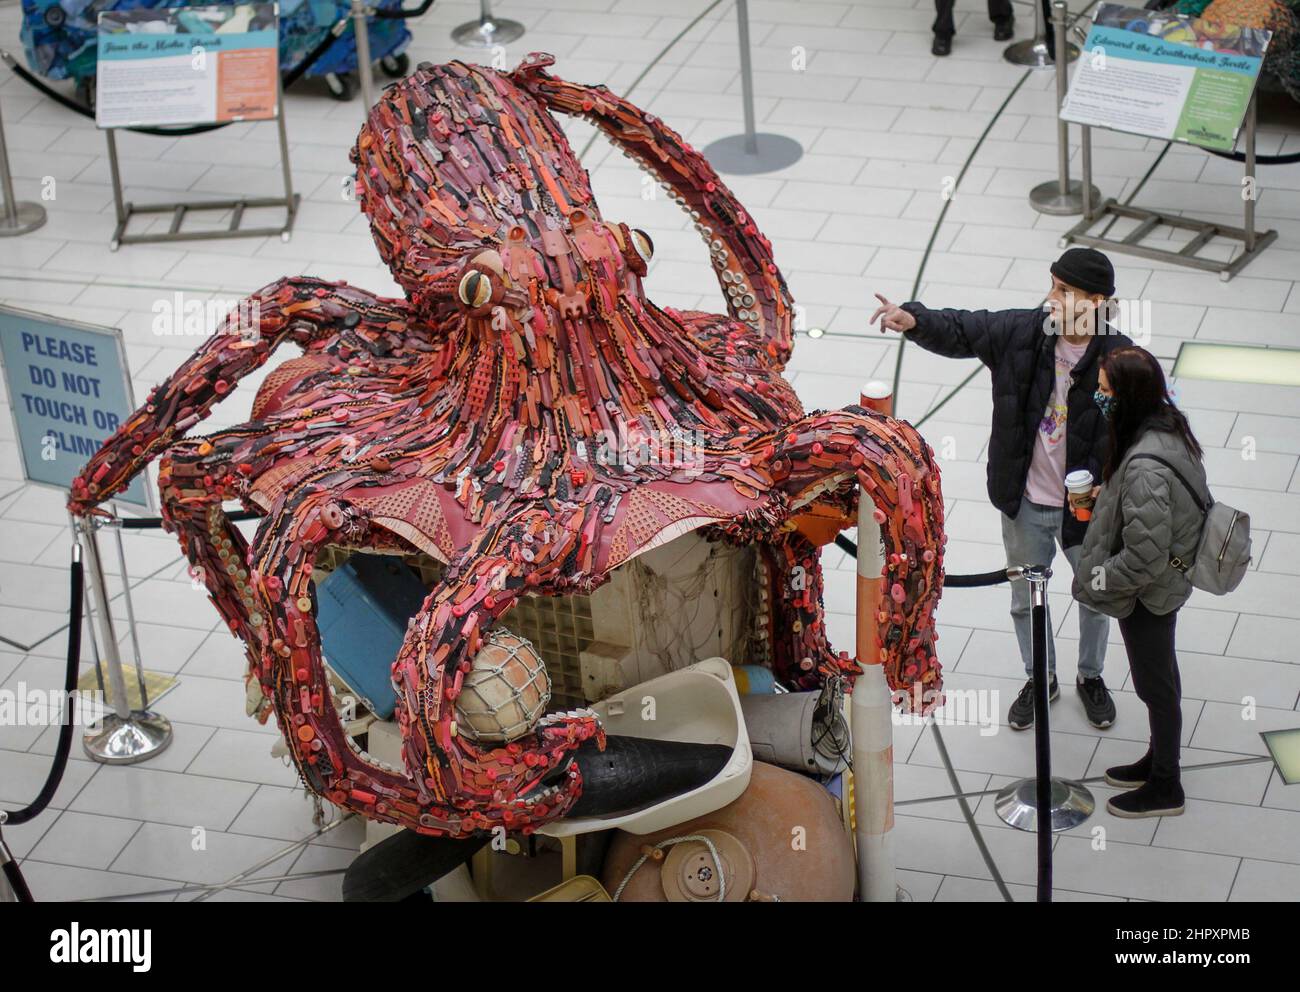 Burnaby, Canada. 23rd Feb, 2022. People look at an octopus art sculpture made from plastic marine debris during the 'Washed Ashore' exhibition at Metrotown mall in Burnaby, British Columbia, Canada, Feb. 23, 2022. The 'Washed Ashore' art sculpture exhibition came to Western Canada for the first time featuring 9 giant marine wildlife sculptures made entirely from plastic marine debris that has been collected from the Pacific Ocean. The exhibition runs from Feb. 23 to April 30. Credit: Liang Sen/Xinhua/Alamy Live News Stock Photo